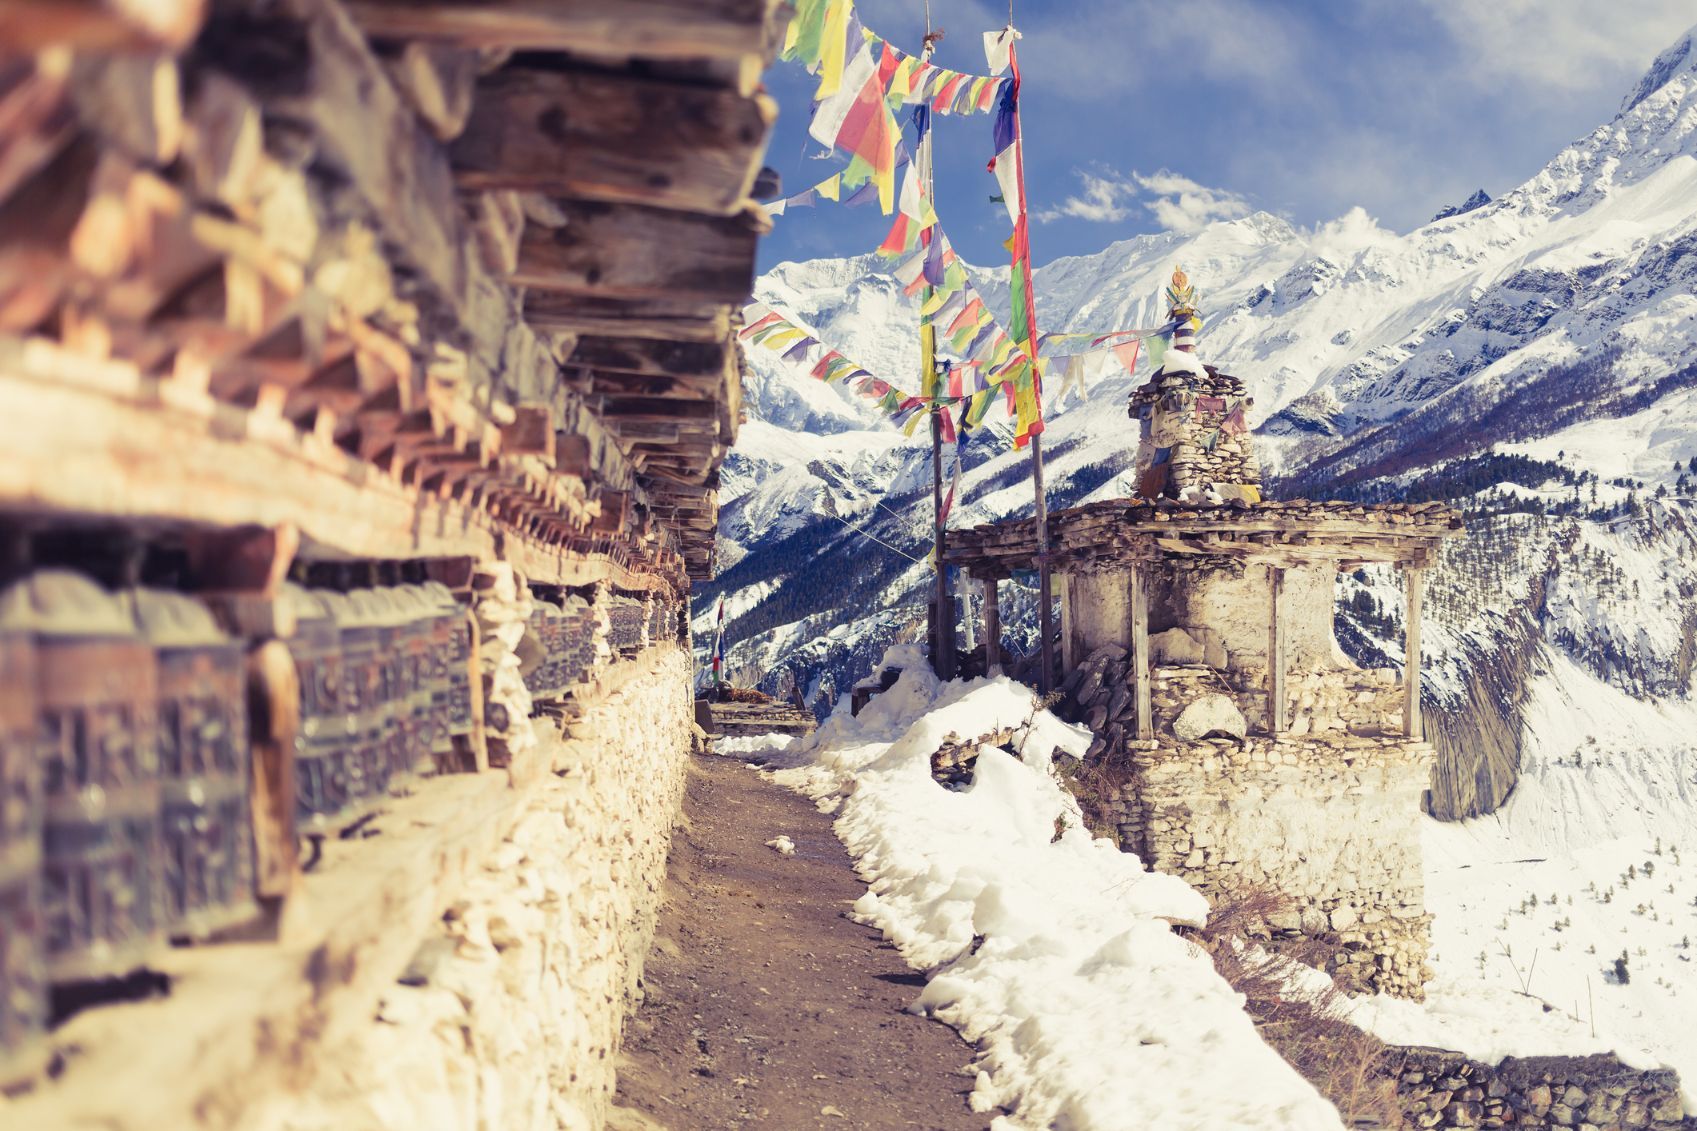 Views of the prayer flags and mountains, thousands of metres high on the Annapurna Circuit. 